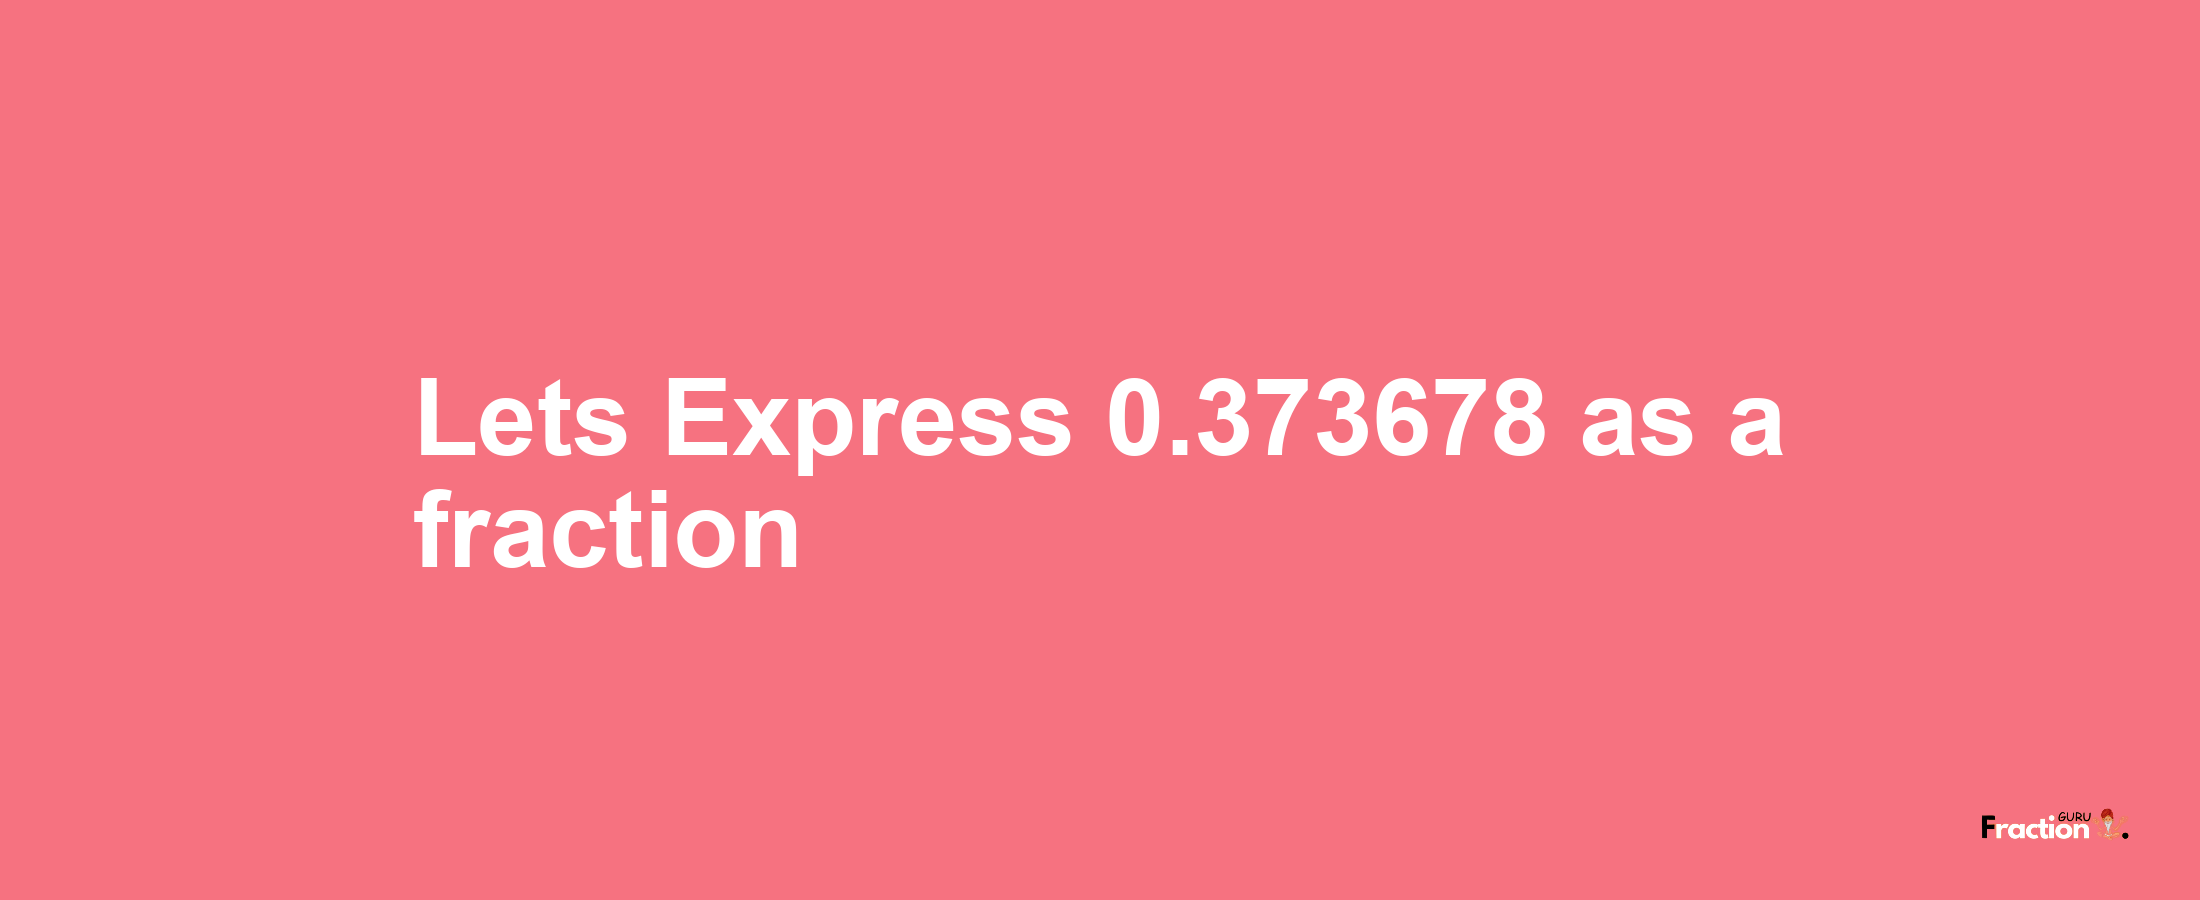 Lets Express 0.373678 as afraction